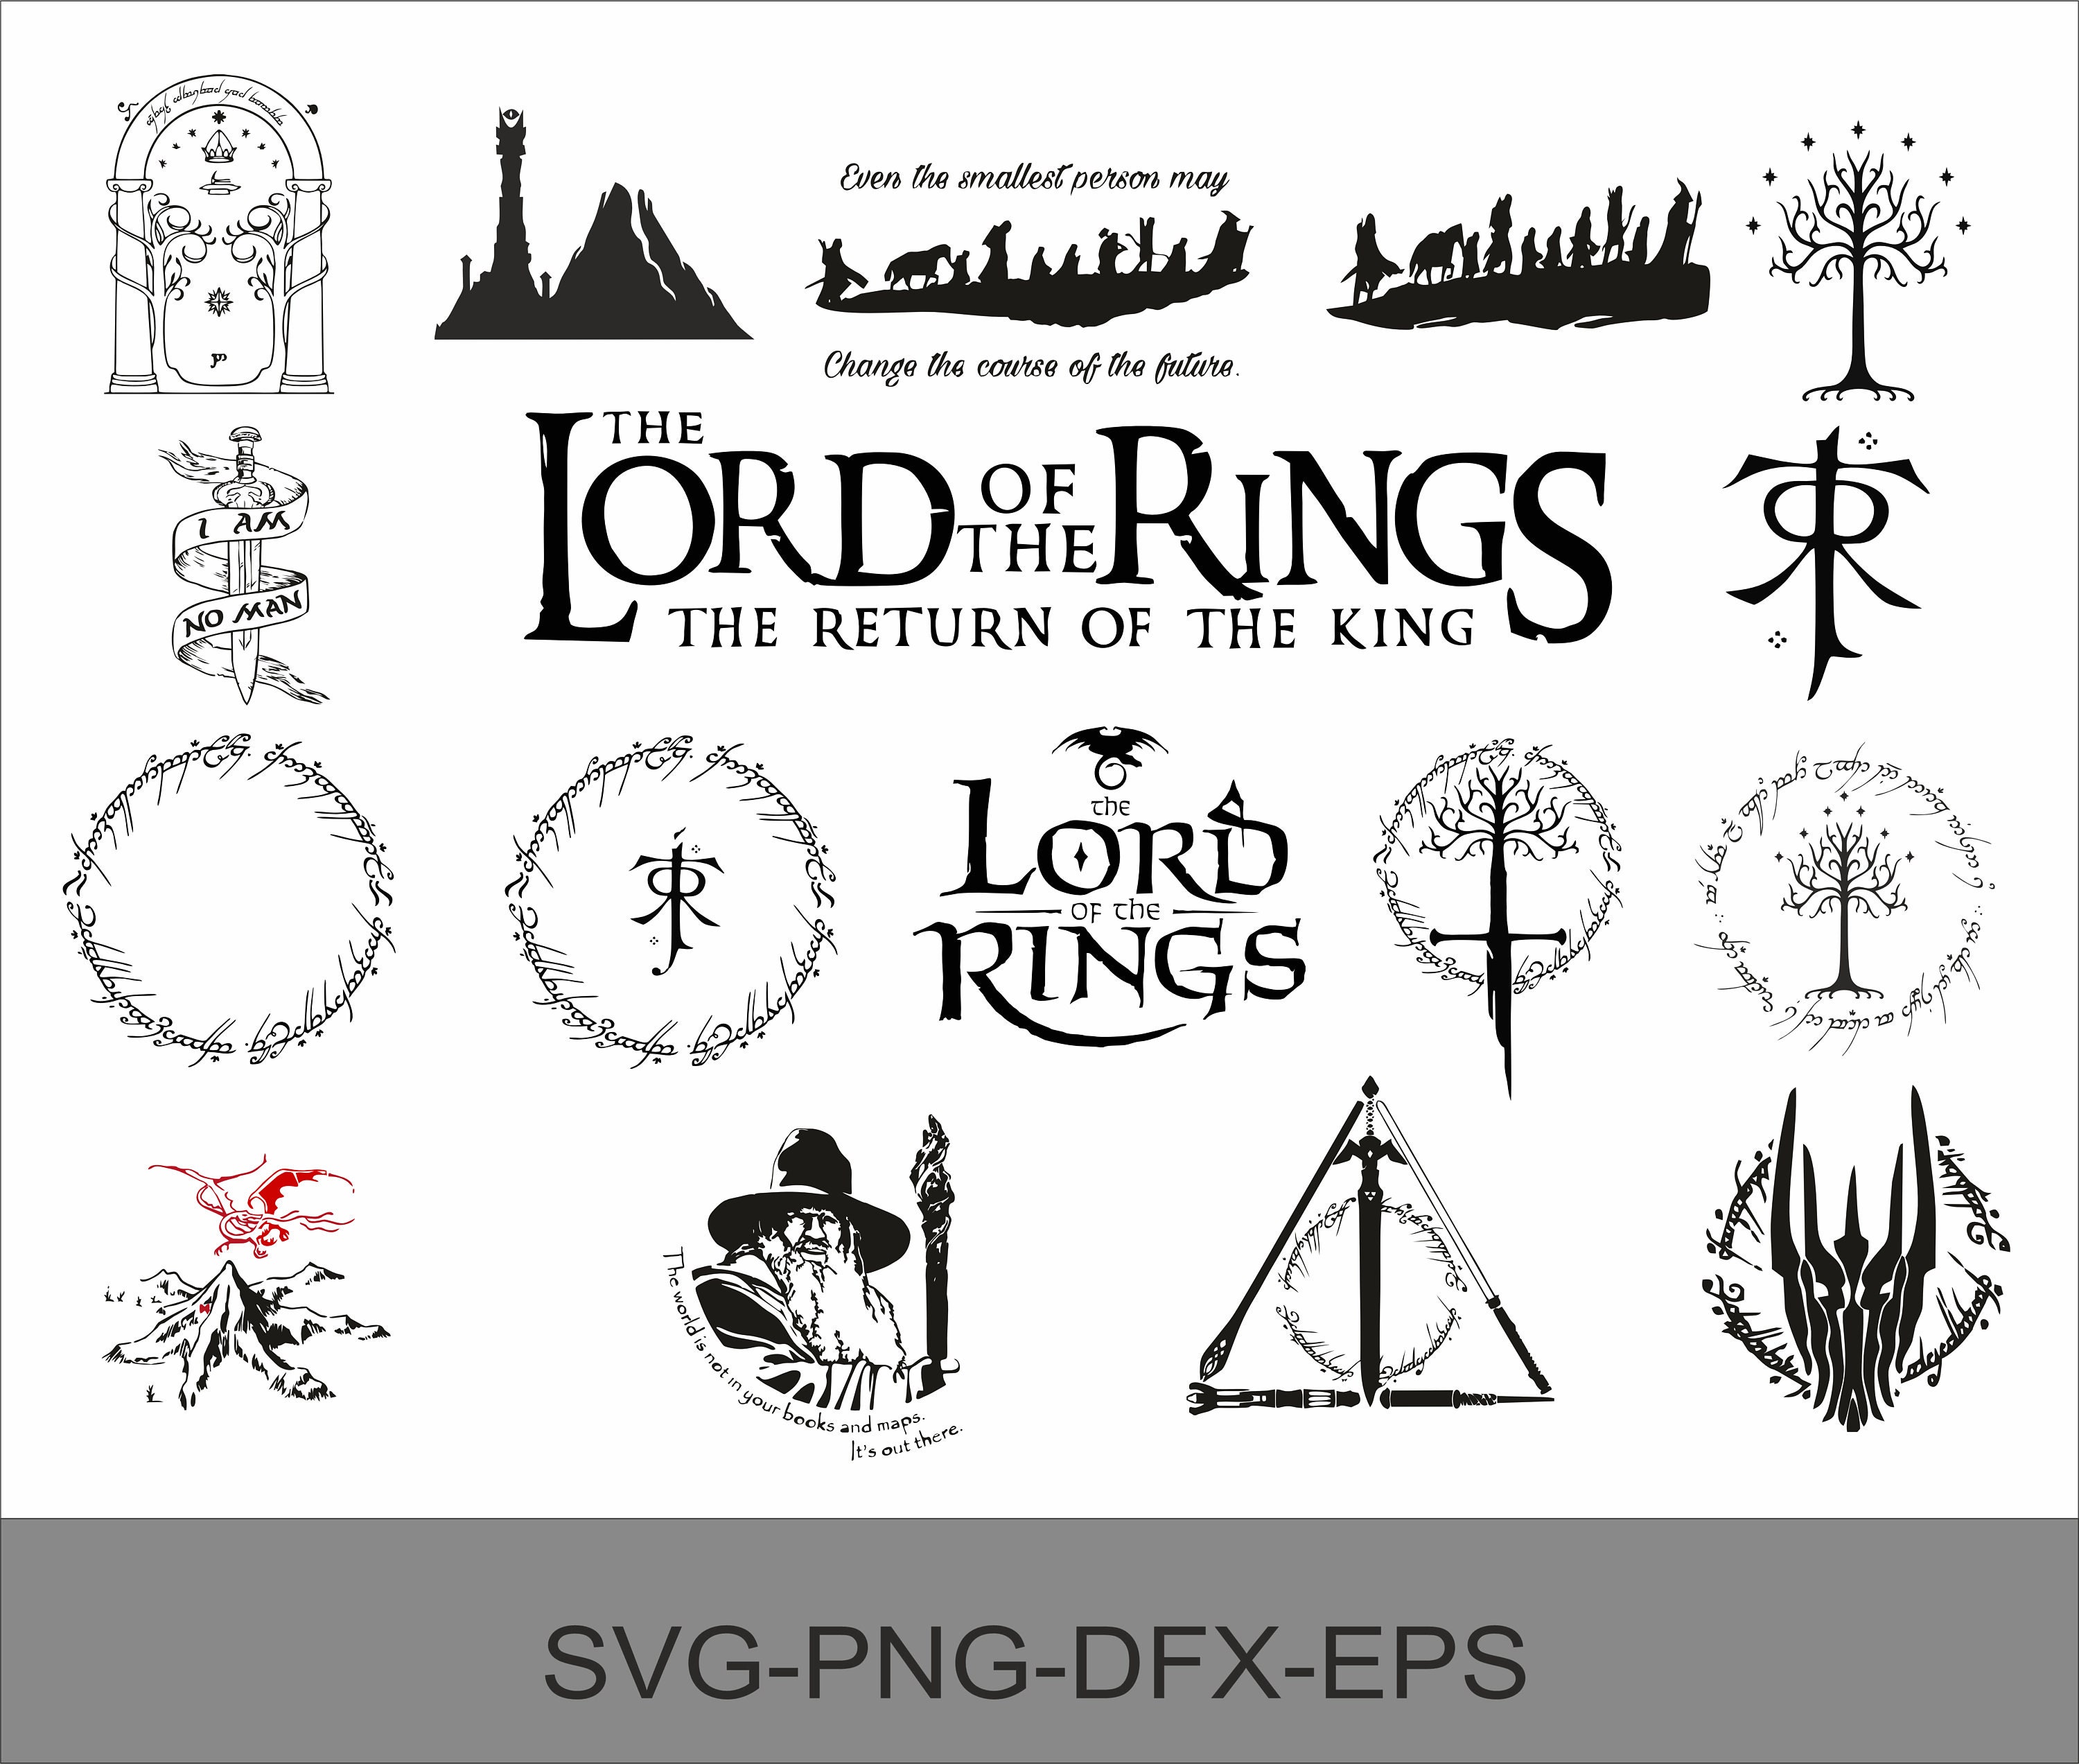 Lord Of The Rings Svg Sauron Svg Lotr Svg Sticker Gift Card Mask Tattoo  Sticker Art Design Logo SVG PNG JPG Clipart Vector Cut Cutting File